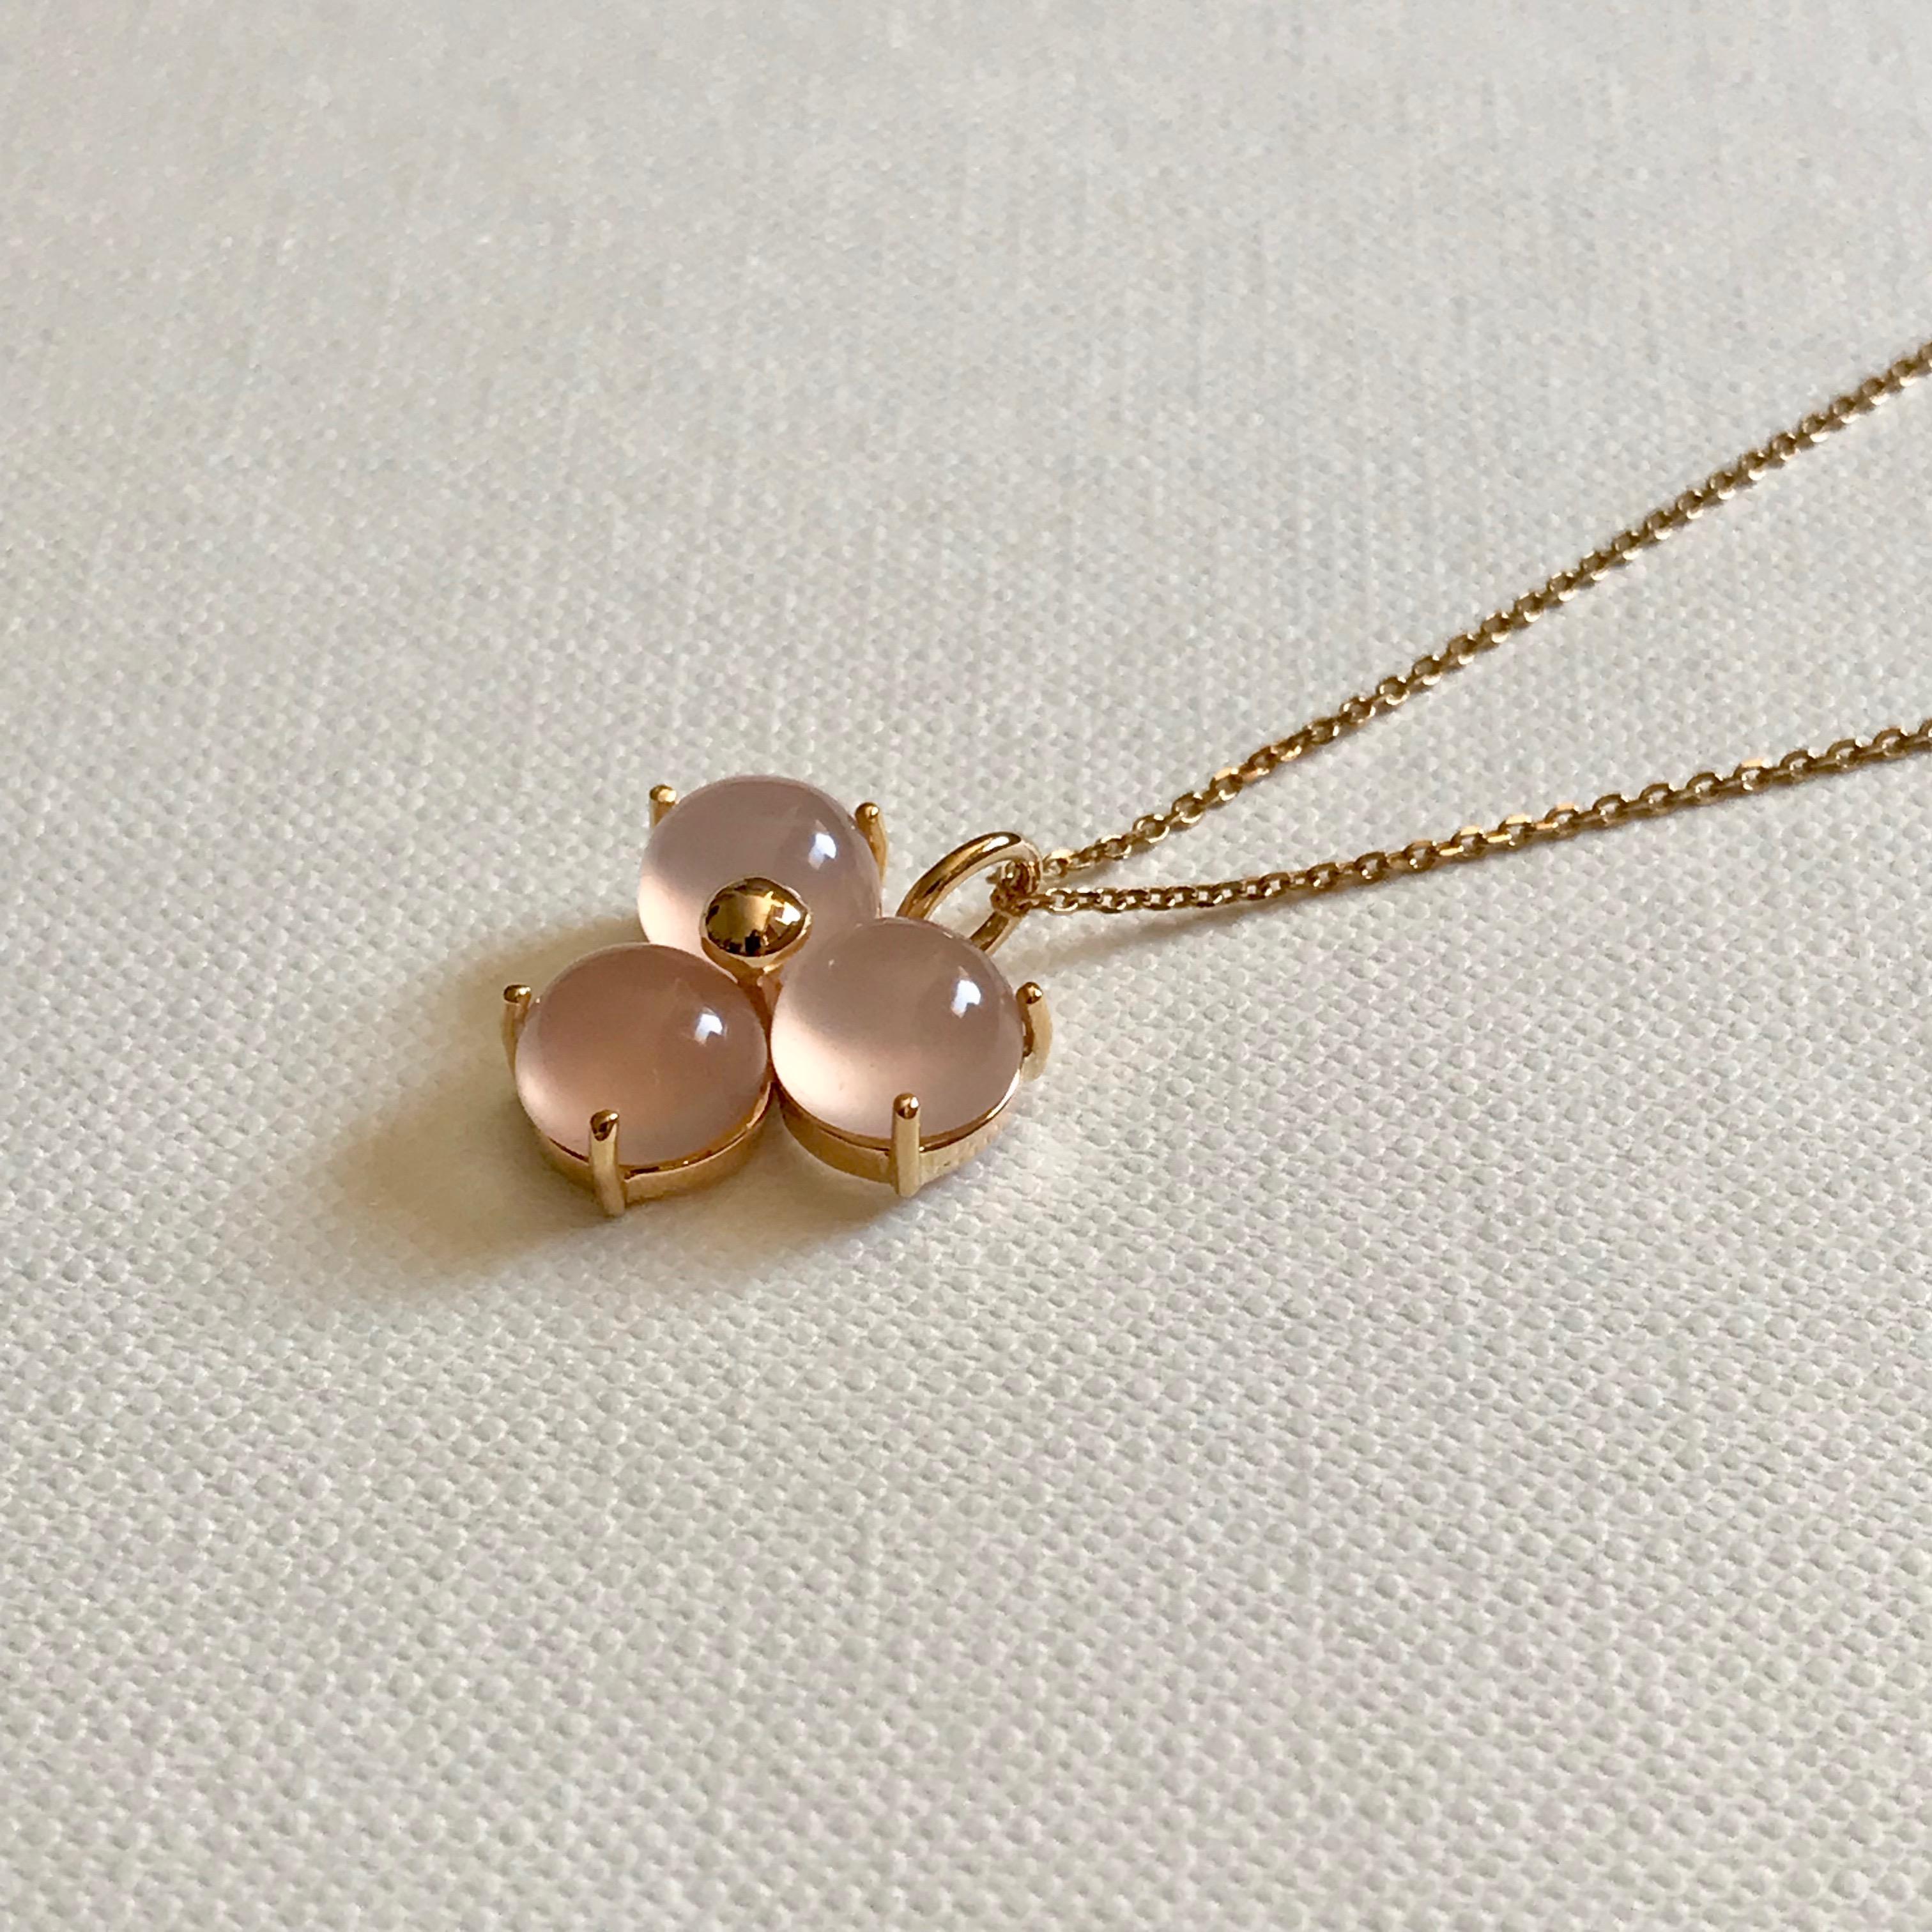 Contemporary 18 Karat Yellow Gold Pink Blossom Flower Charm Pendant Chain Necklace